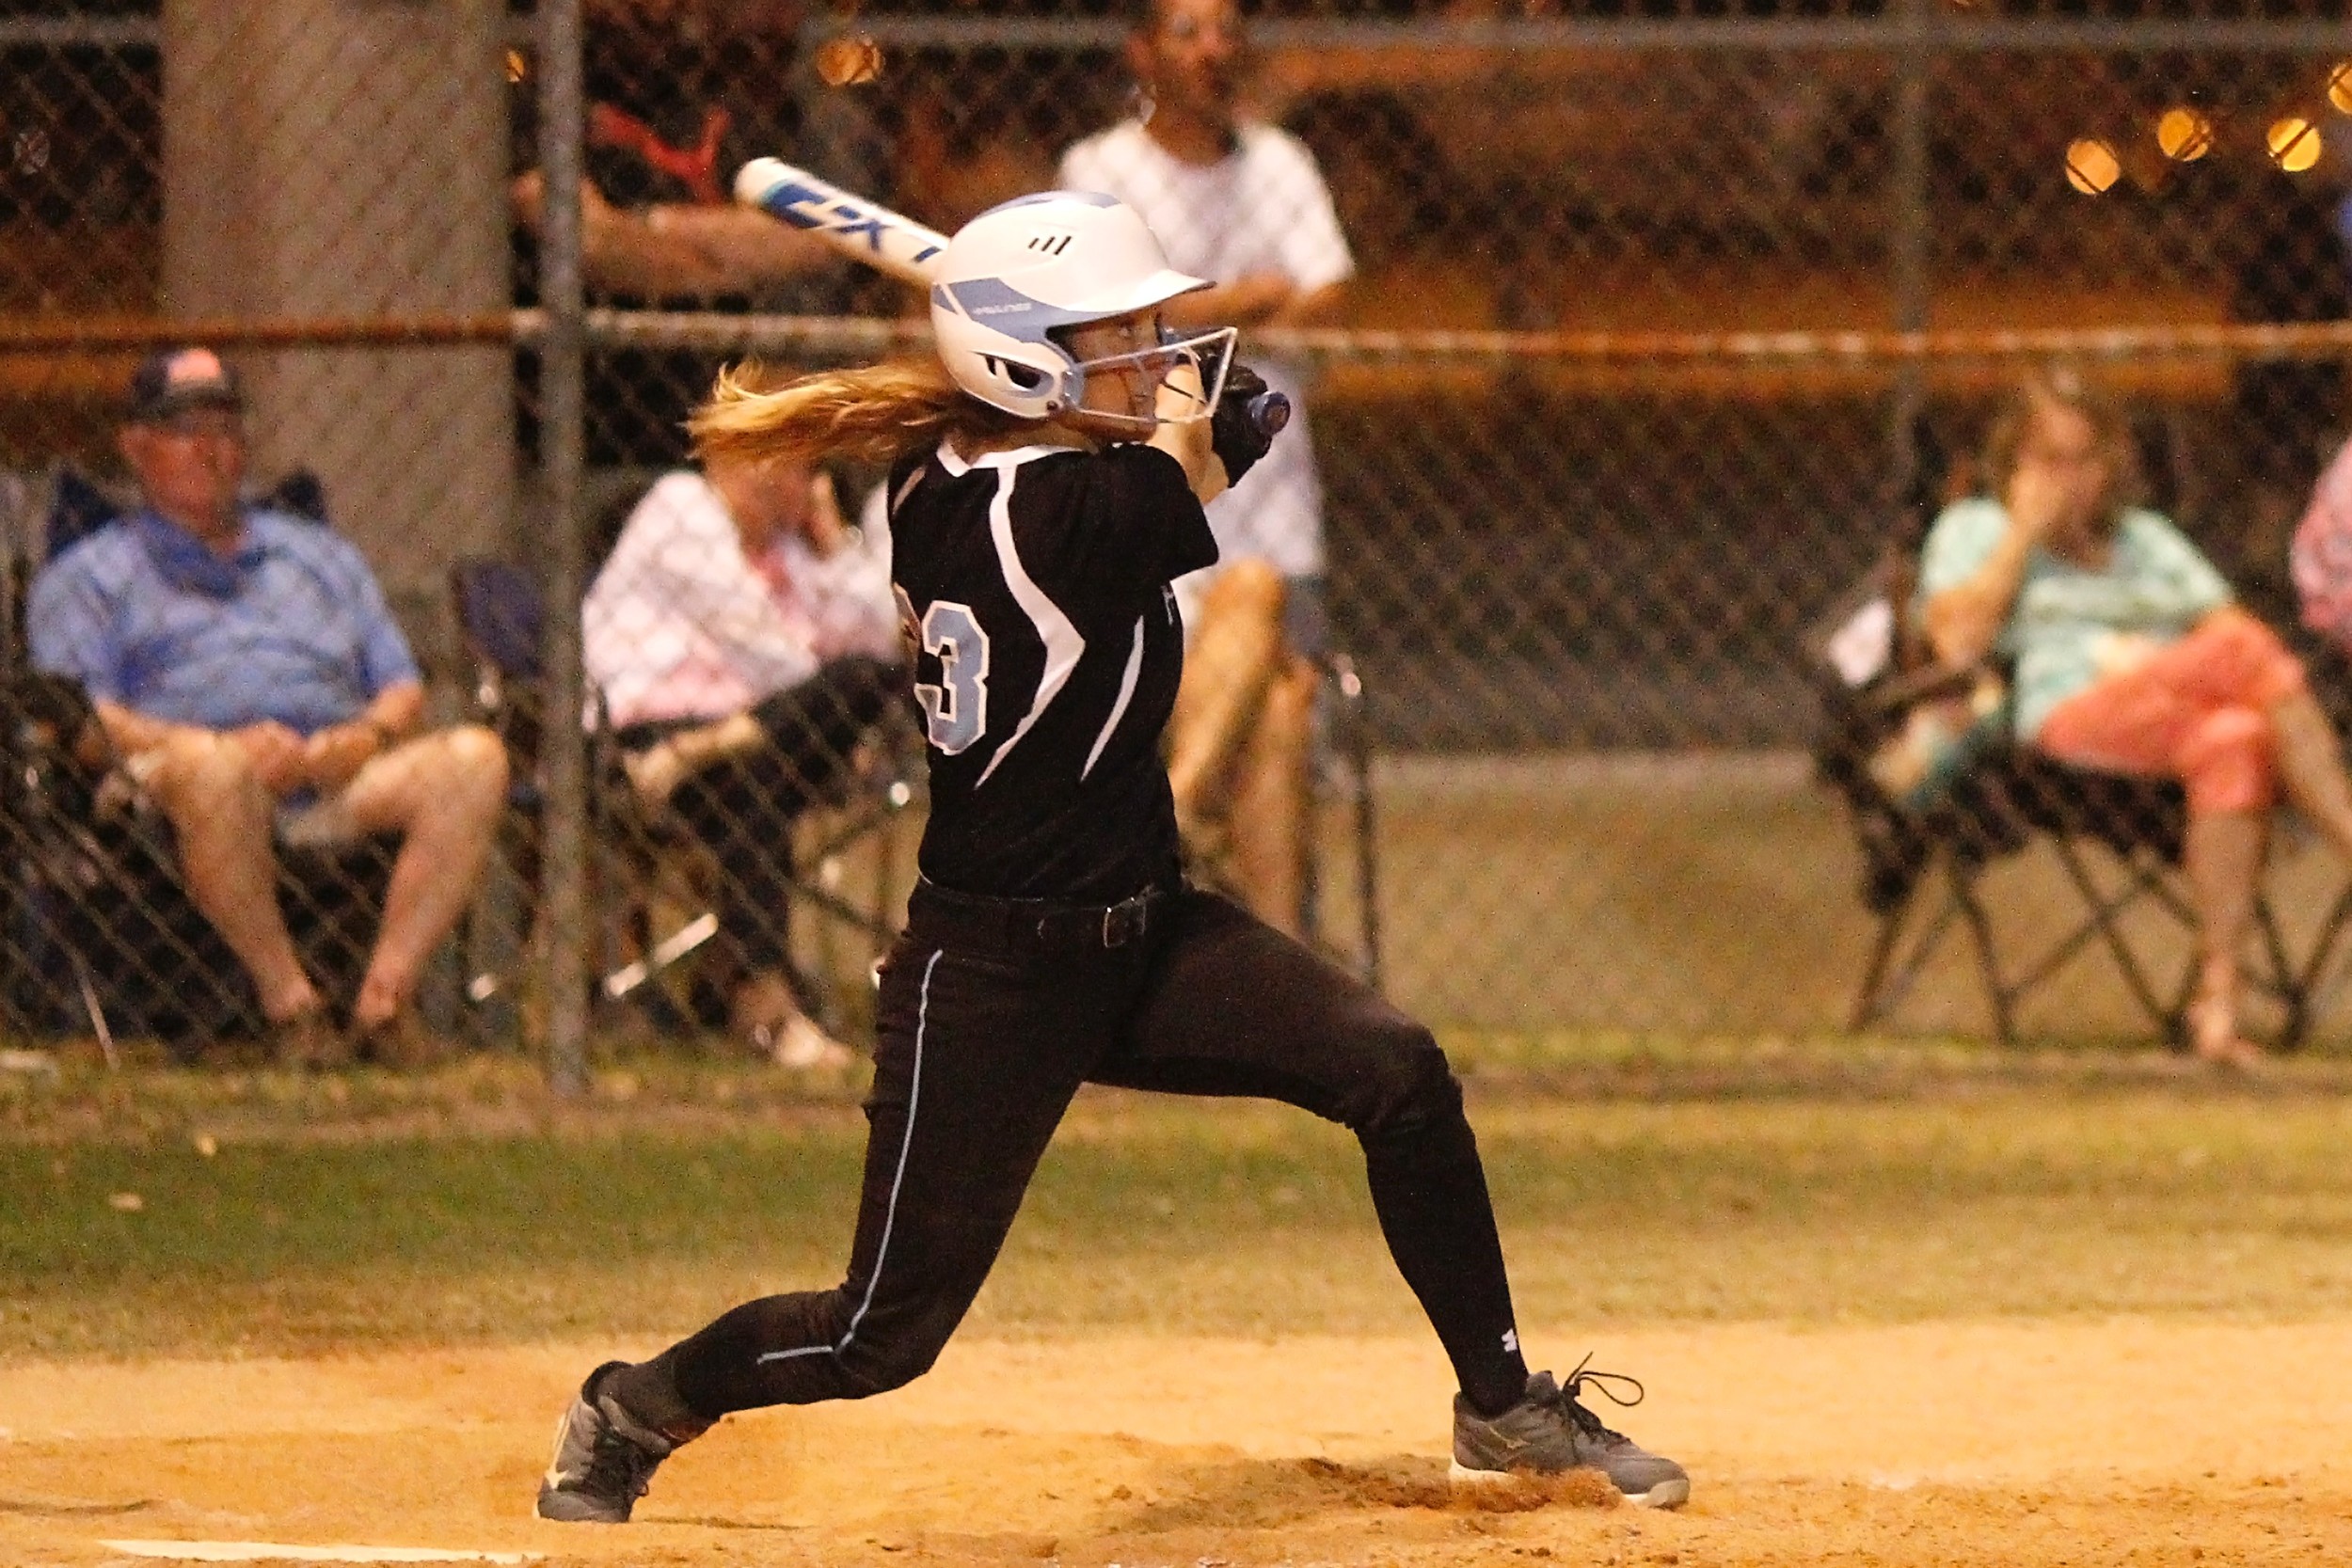 The Sharks’ #23 Kiley Hennessey watches her game winning base hit split the gap in the outfield to drive in teammate Quinlan Richmond.